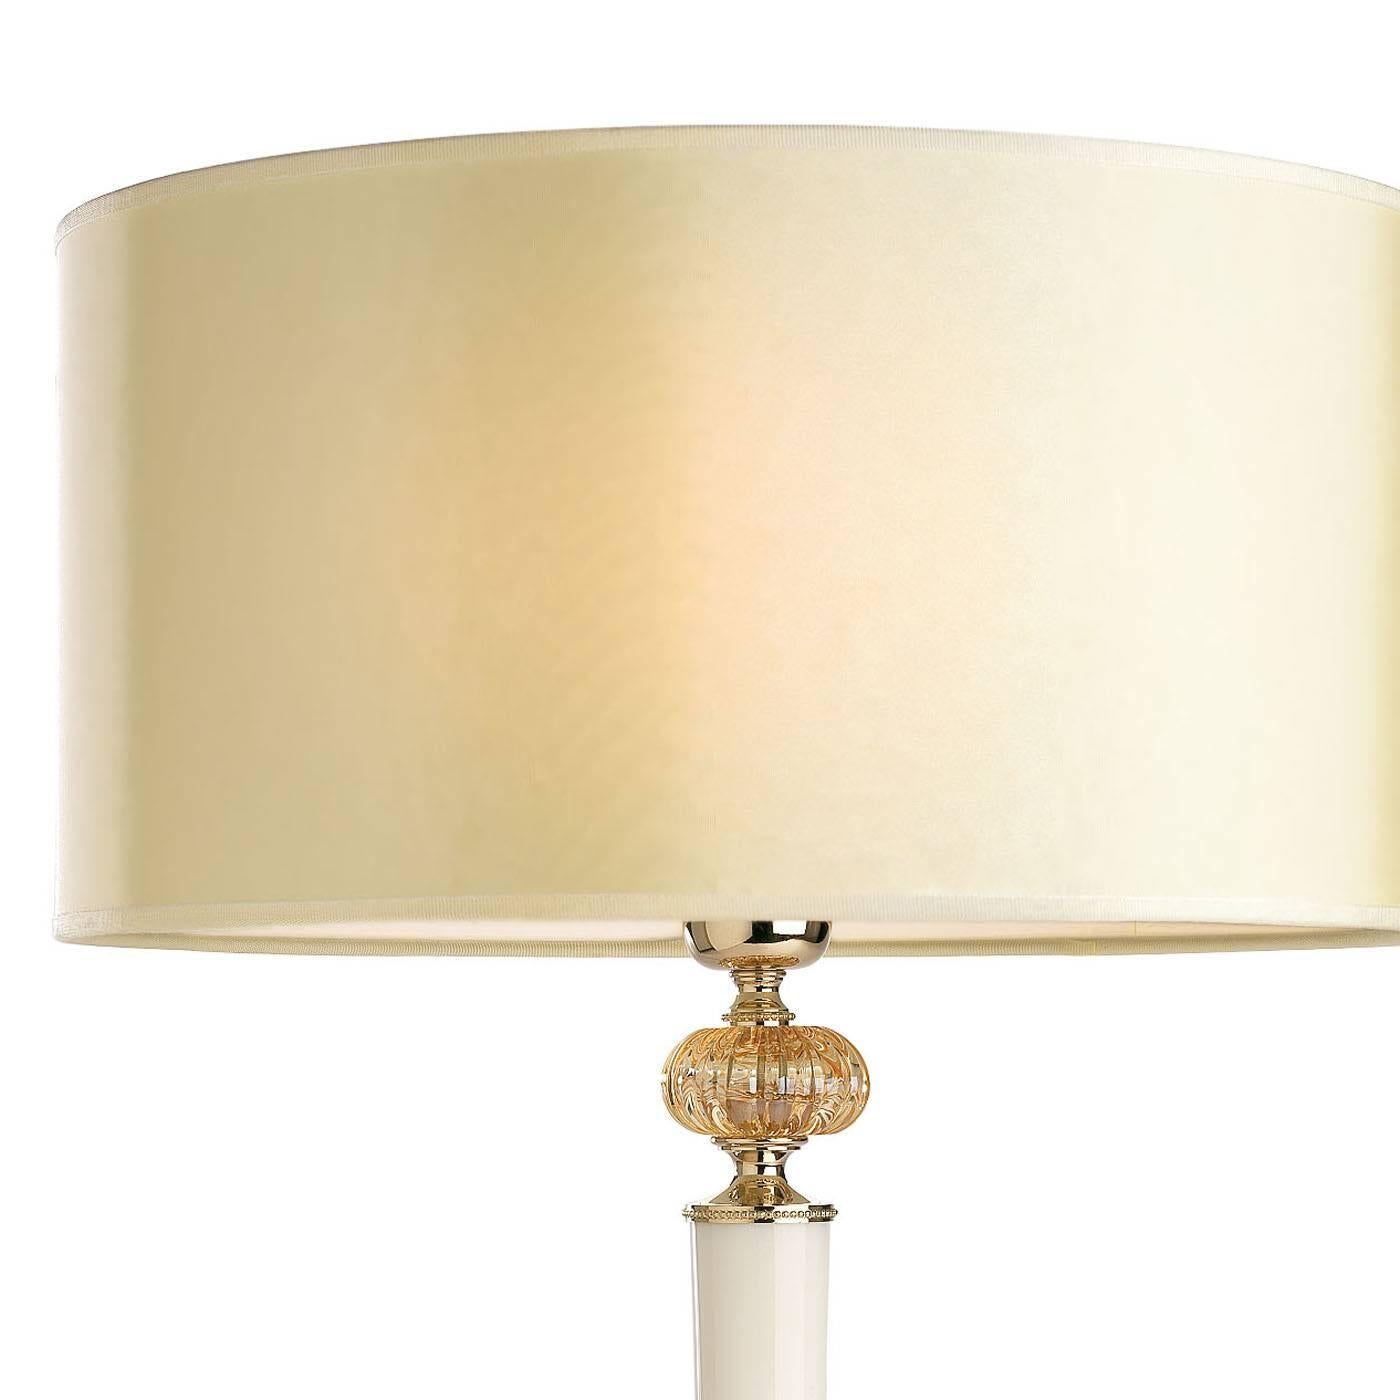 This exquisite desk lamp features an ornate round base in brass with a light gold finish supporting an elegant shaft in Calacatta marble that is adorned at the top with a crystal decoration. The delicate hue of the fabric covering the shade is in